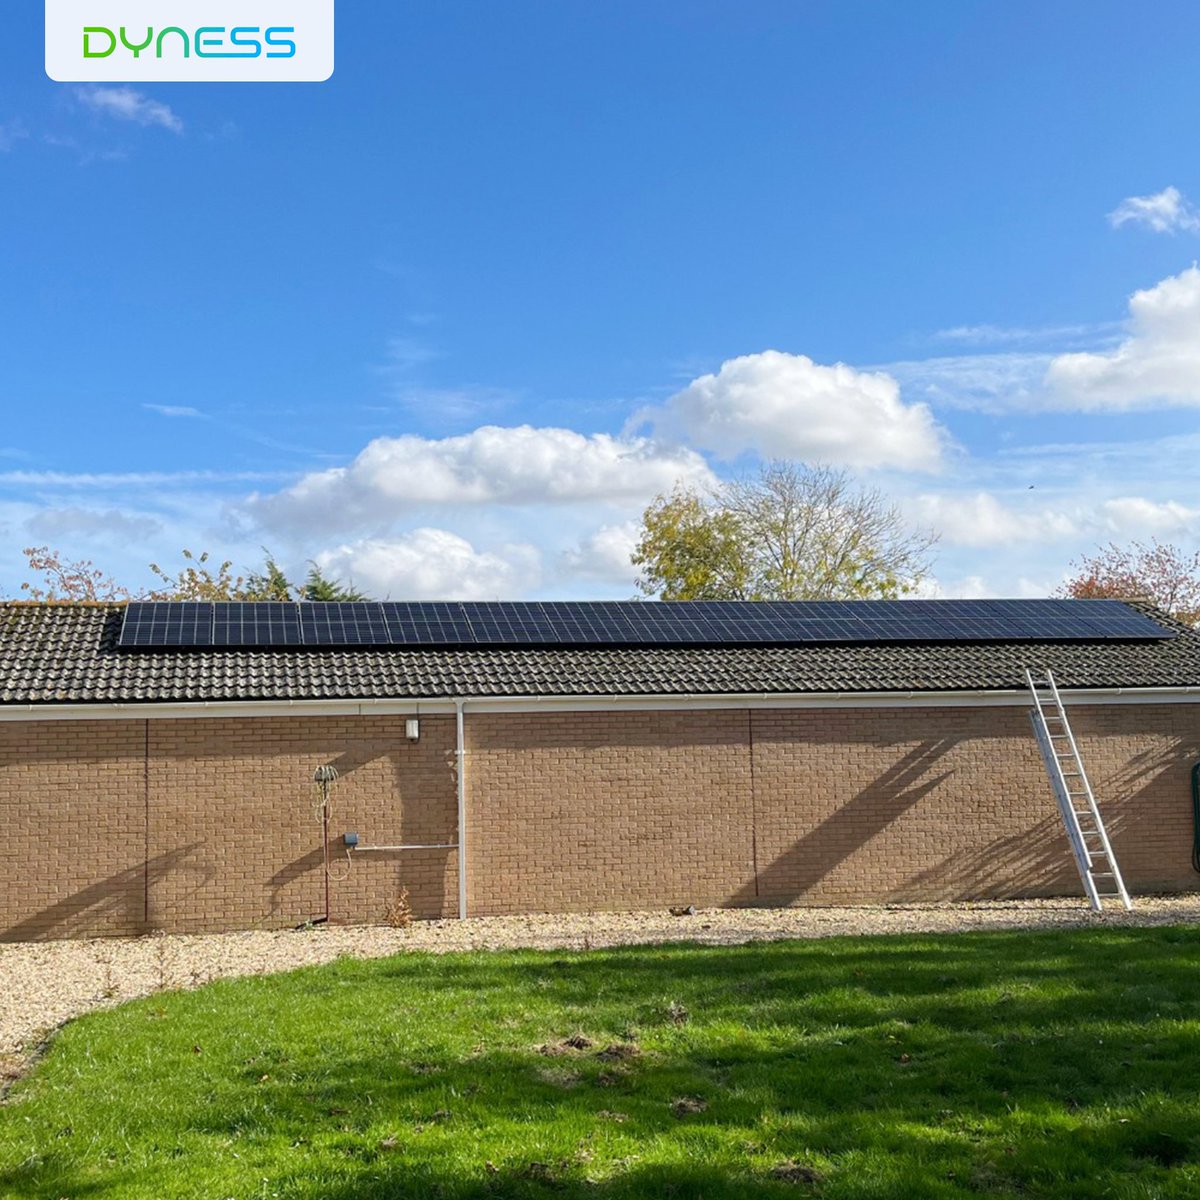 🌟 Check out these exciting #showcases featuring Dyness DL5.0C from the #UK and the #Philippines! ☀️🔋 Enhance your solar power system with Dyness DL5.0C today: dyness.com/products/dl5-0c #DynessShowcases #SolarPower #RenewableEnergy #InverterCompatibility